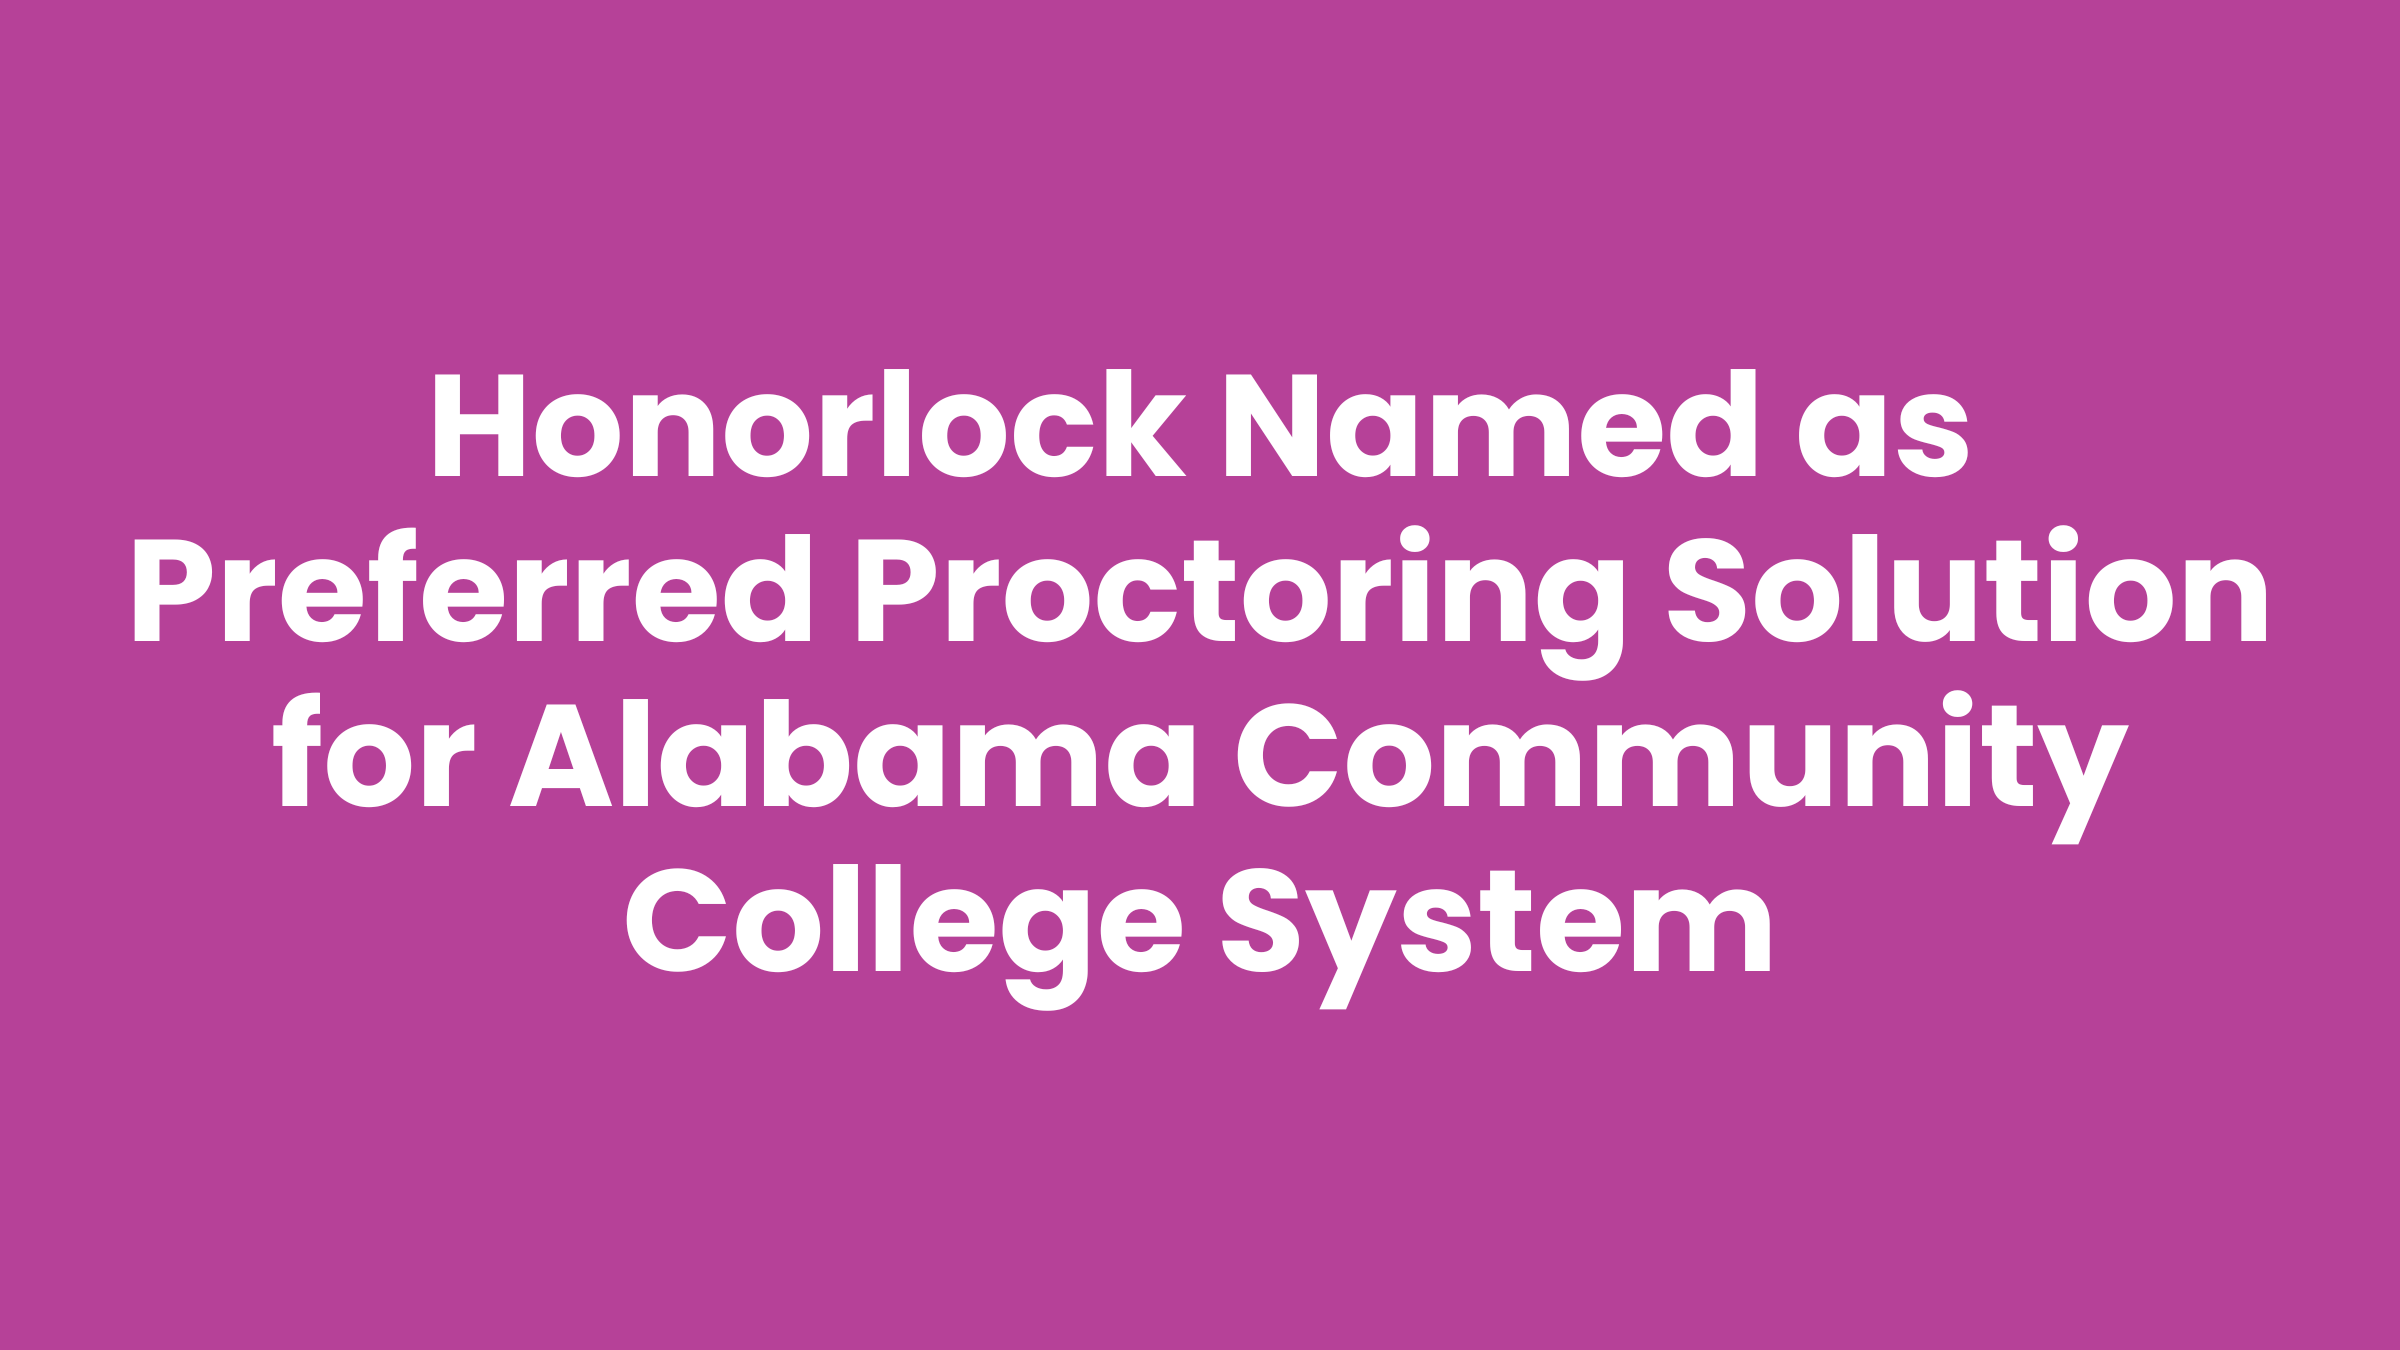 Honorlock named as the preferred online proctoring service for Alabama community college system